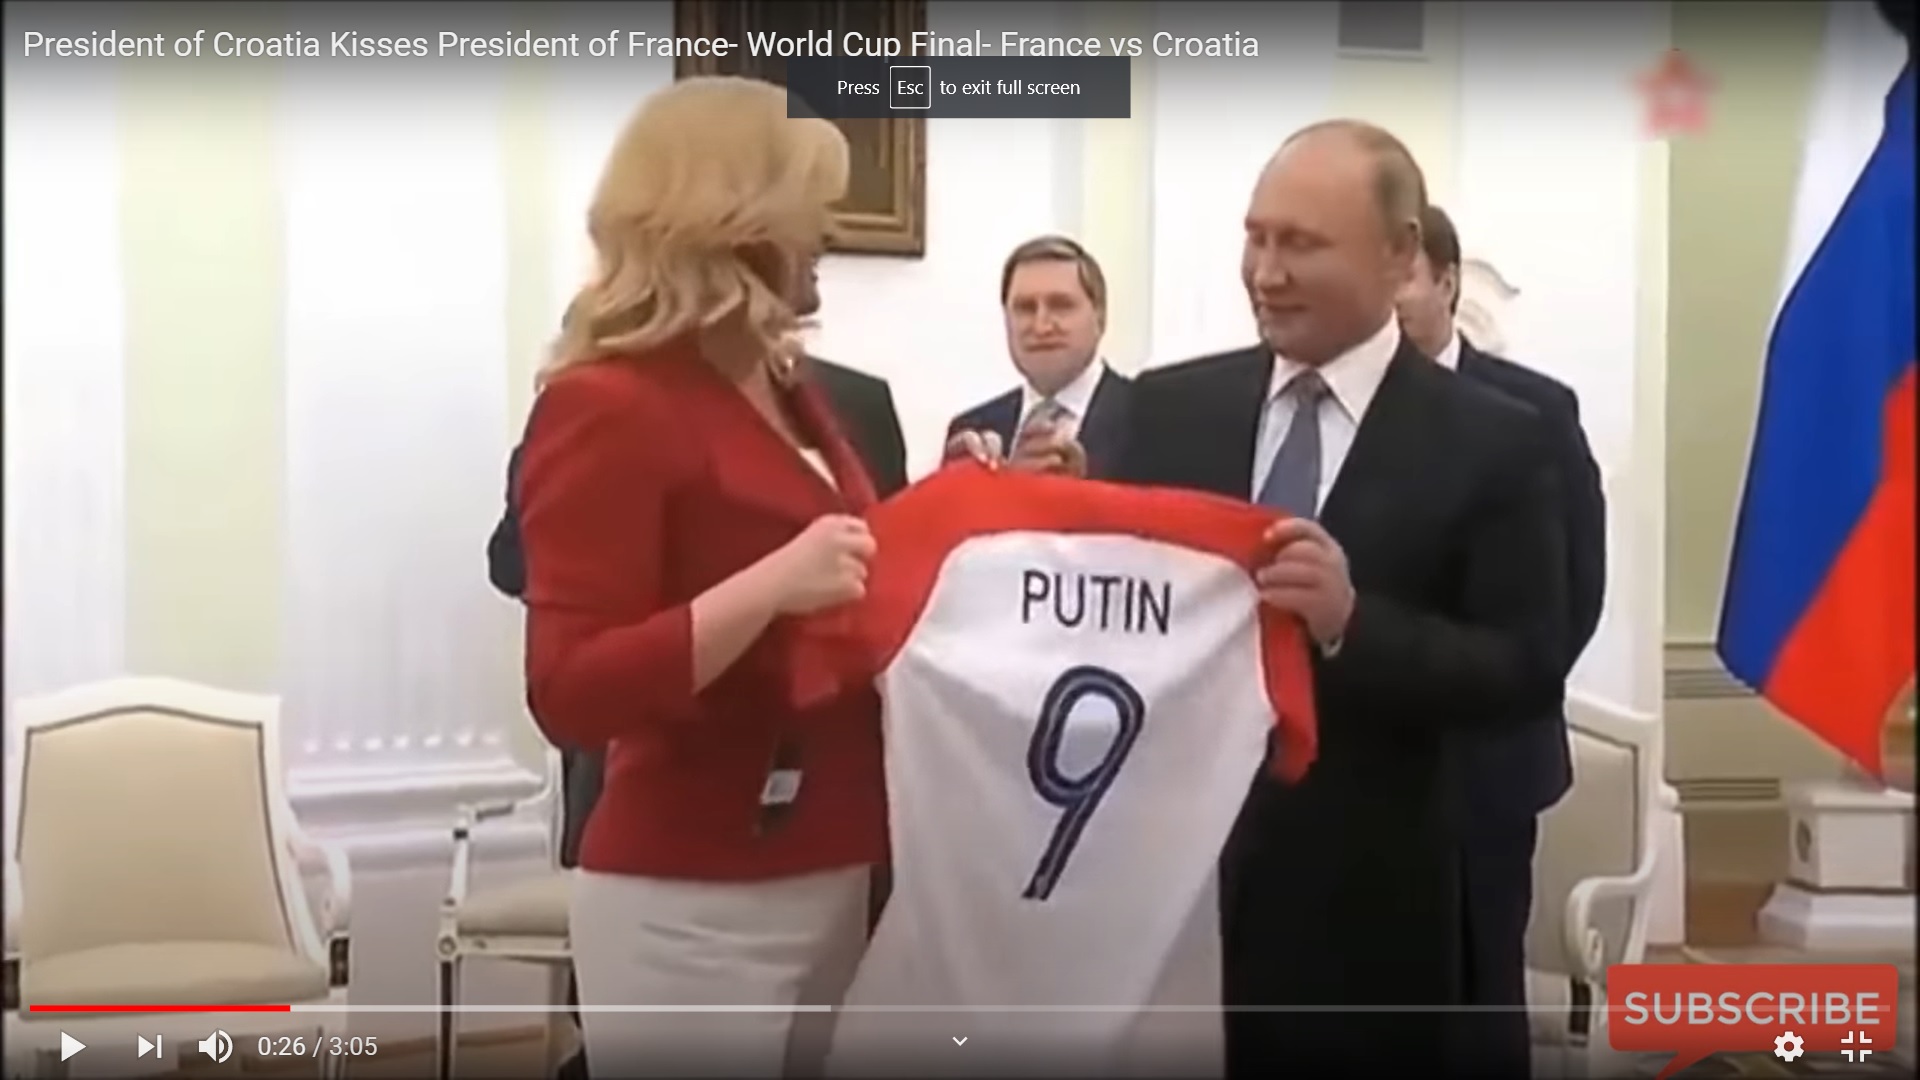 HOTMAN-WHARS-ALL-THEISE-CROATIA-AND-FRANCE-AND-RUSSIA-AND-9-AND-FOTBALL-WHARS-FGIIN-ION OLGA LEDNCIHENKO AJAY MISHAR PUTIN G=FOTOBAL IN CORATIA AND IN FRANCE AJD IN RUSSIA ITEM SONG